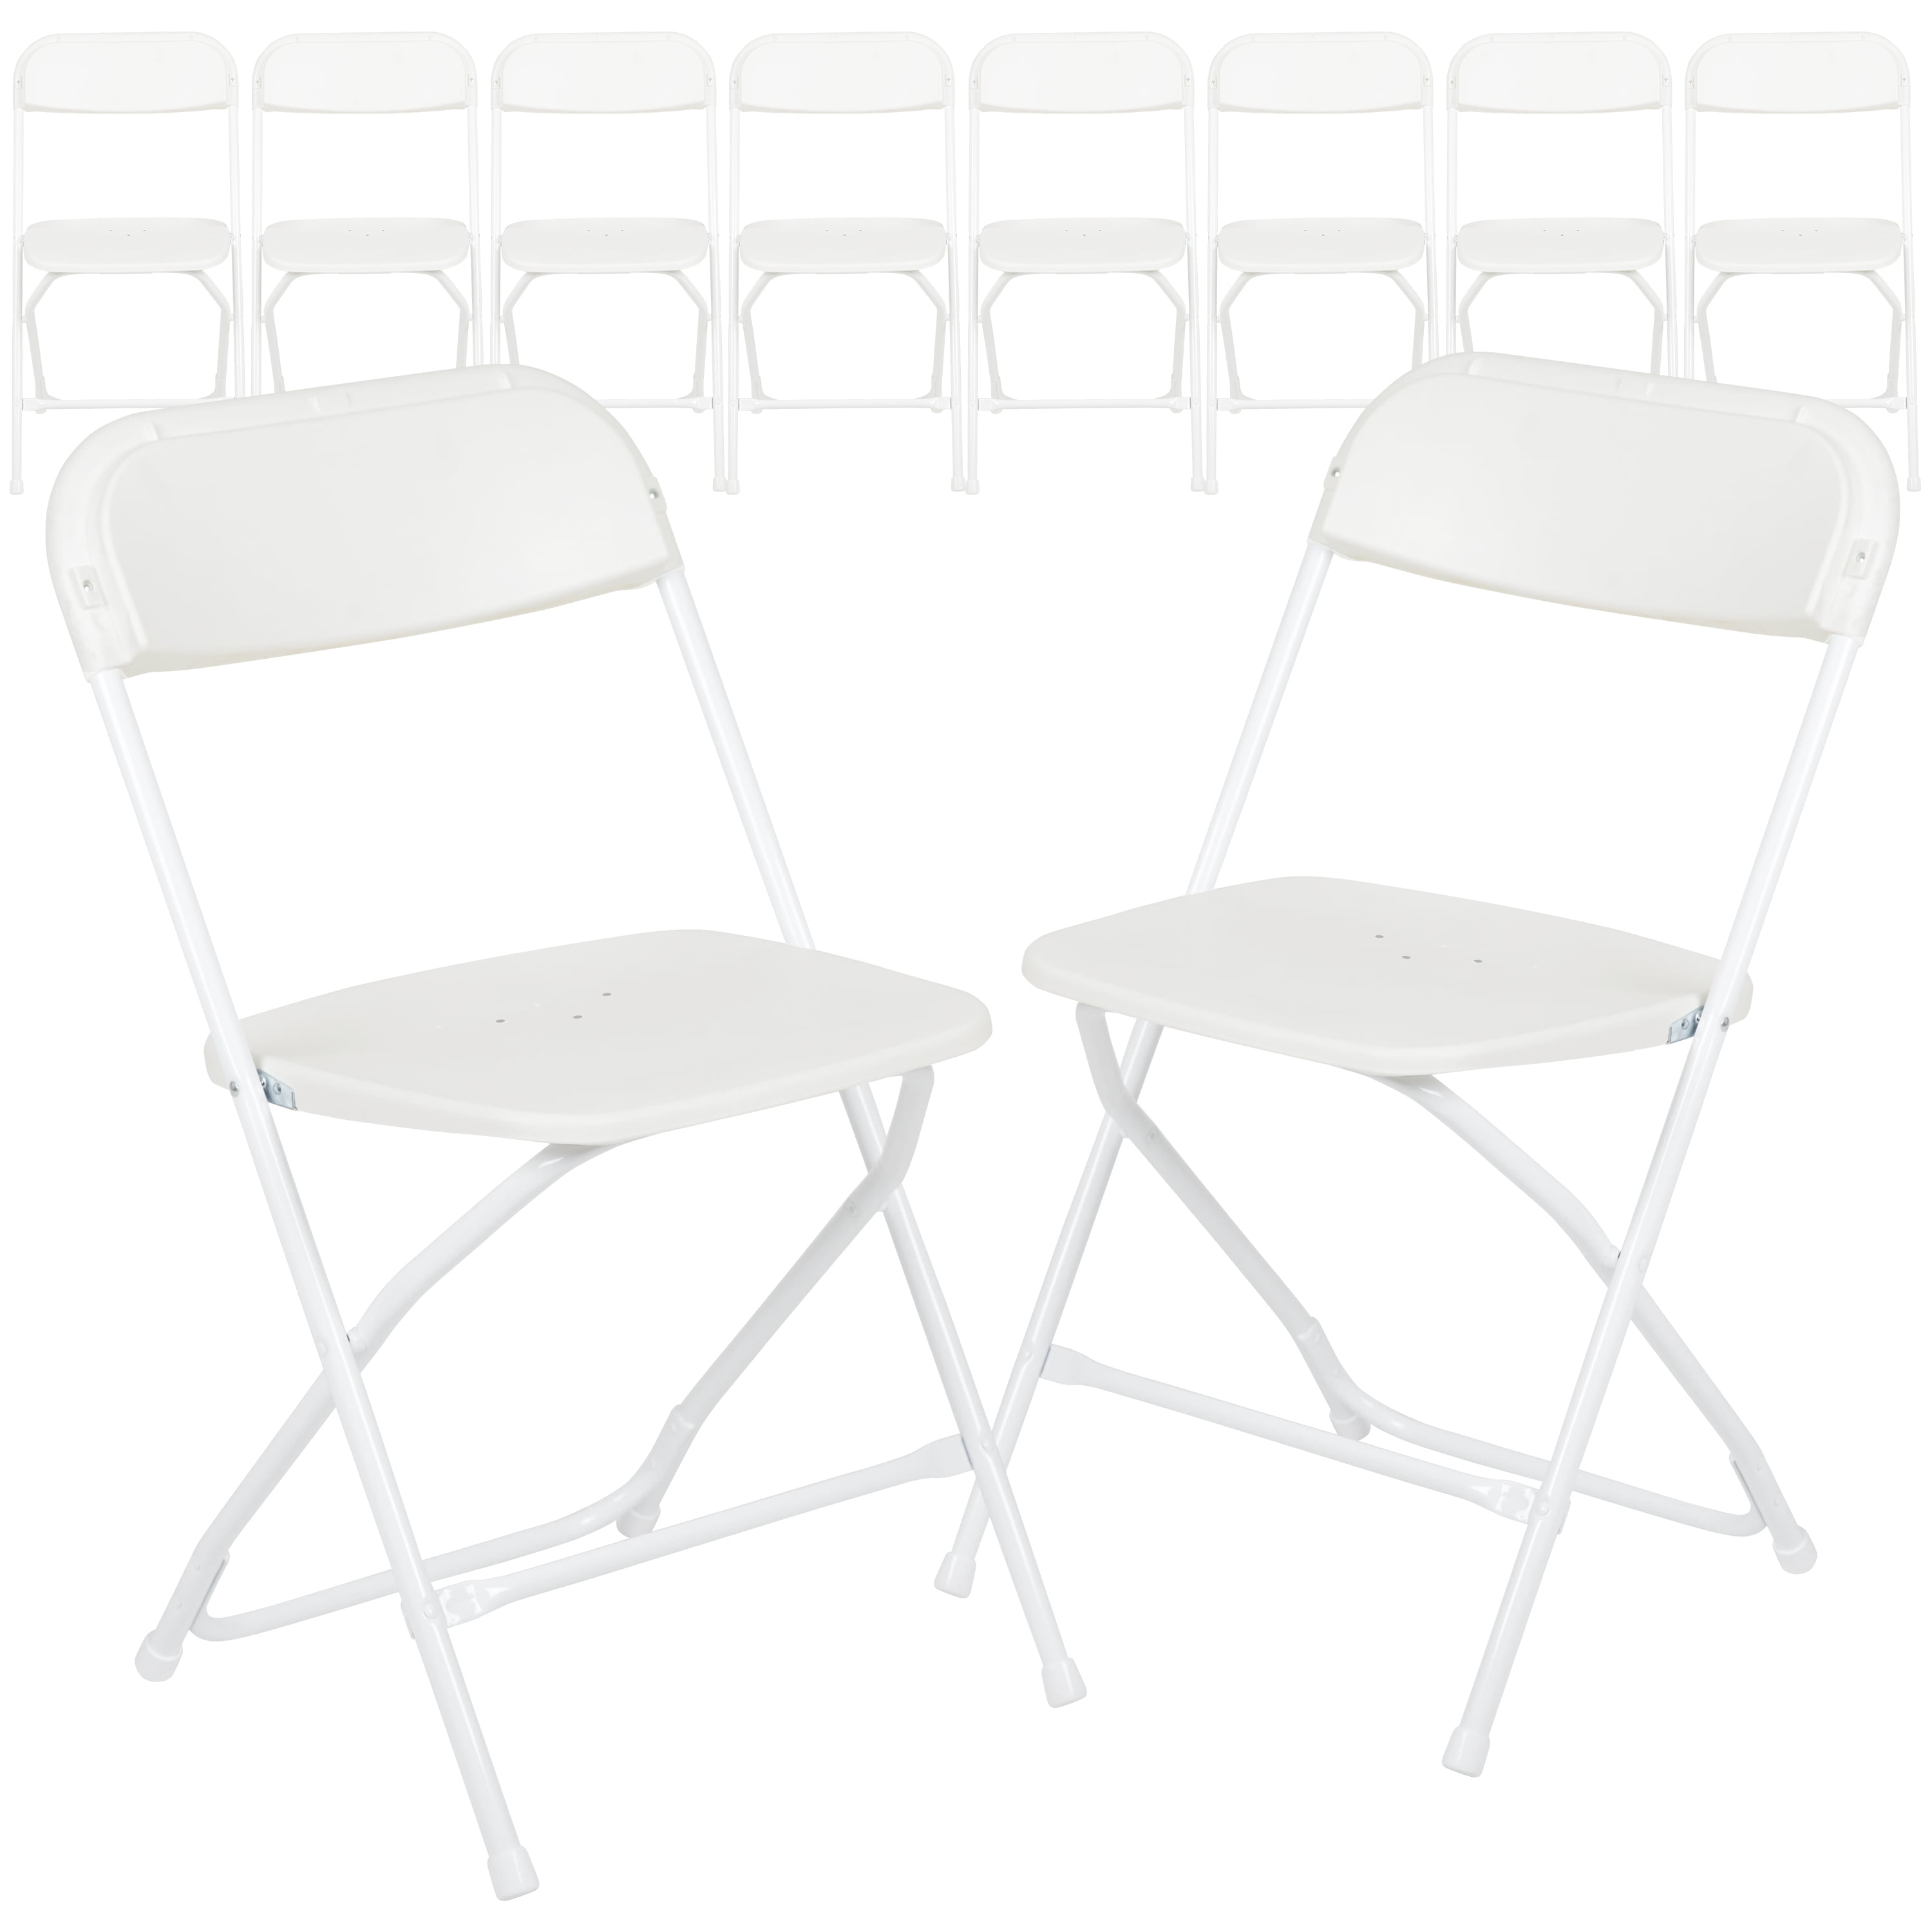 Folding Chair 2 Pack Premium Beige Plastic Hercules Series 650 lb Capacity Designed for Indoor and Outdoor Use